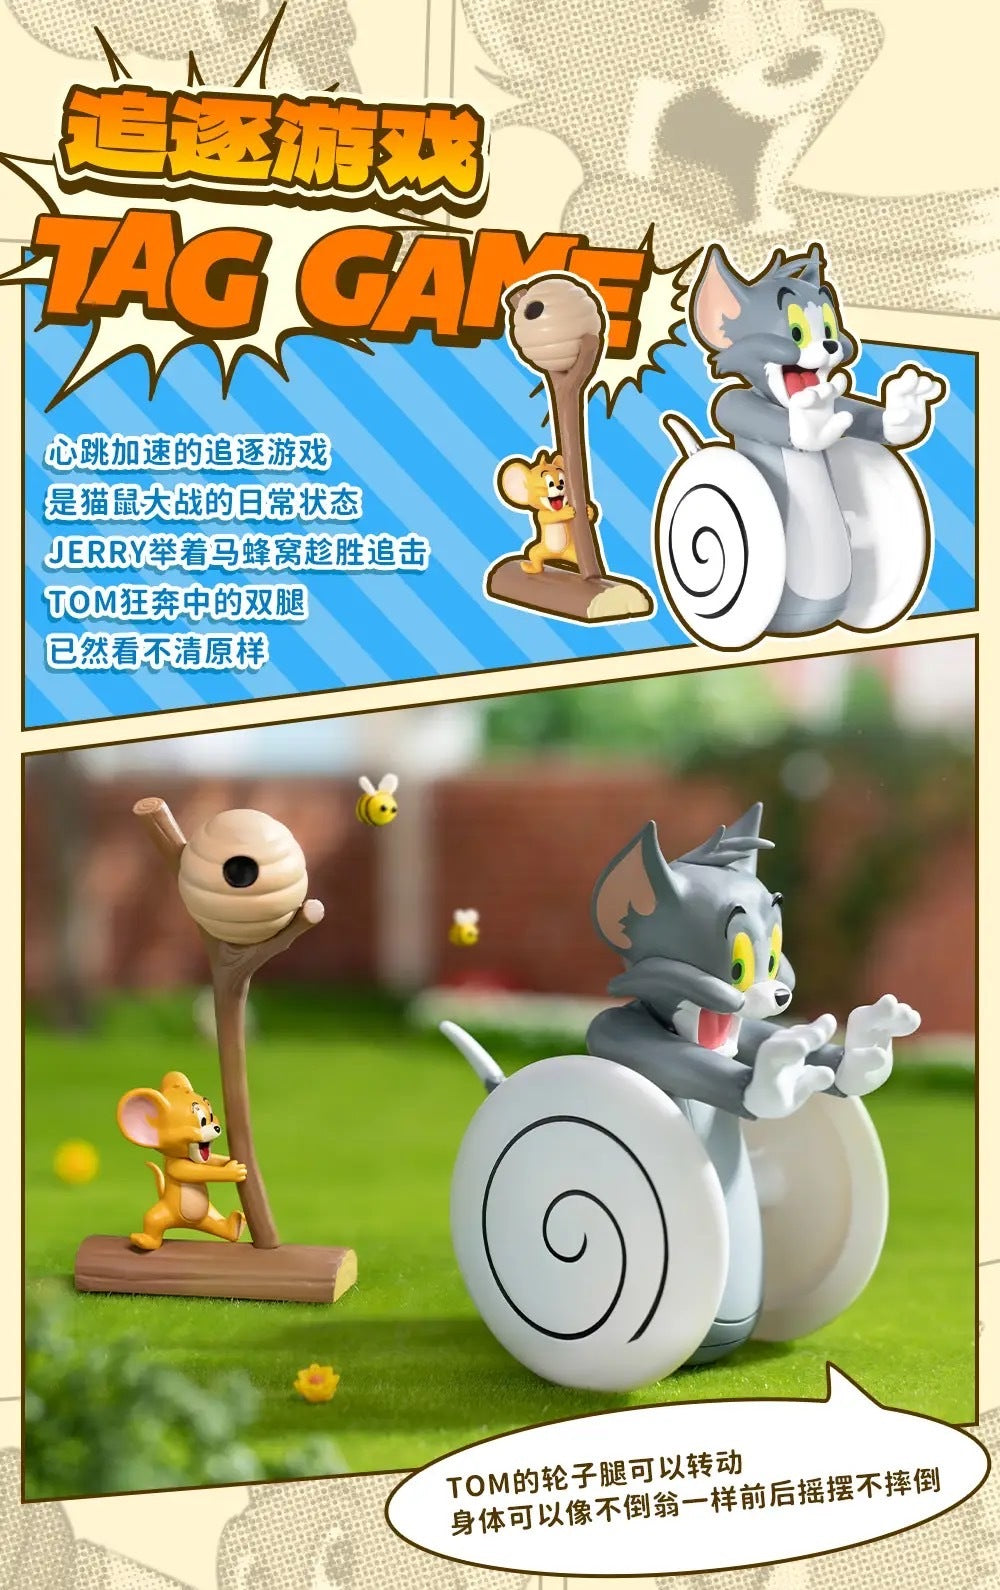 52Toys x Tom And Jerry Brawls Series-Single Box (Random)-52Toys-Ace Cards &amp; Collectibles